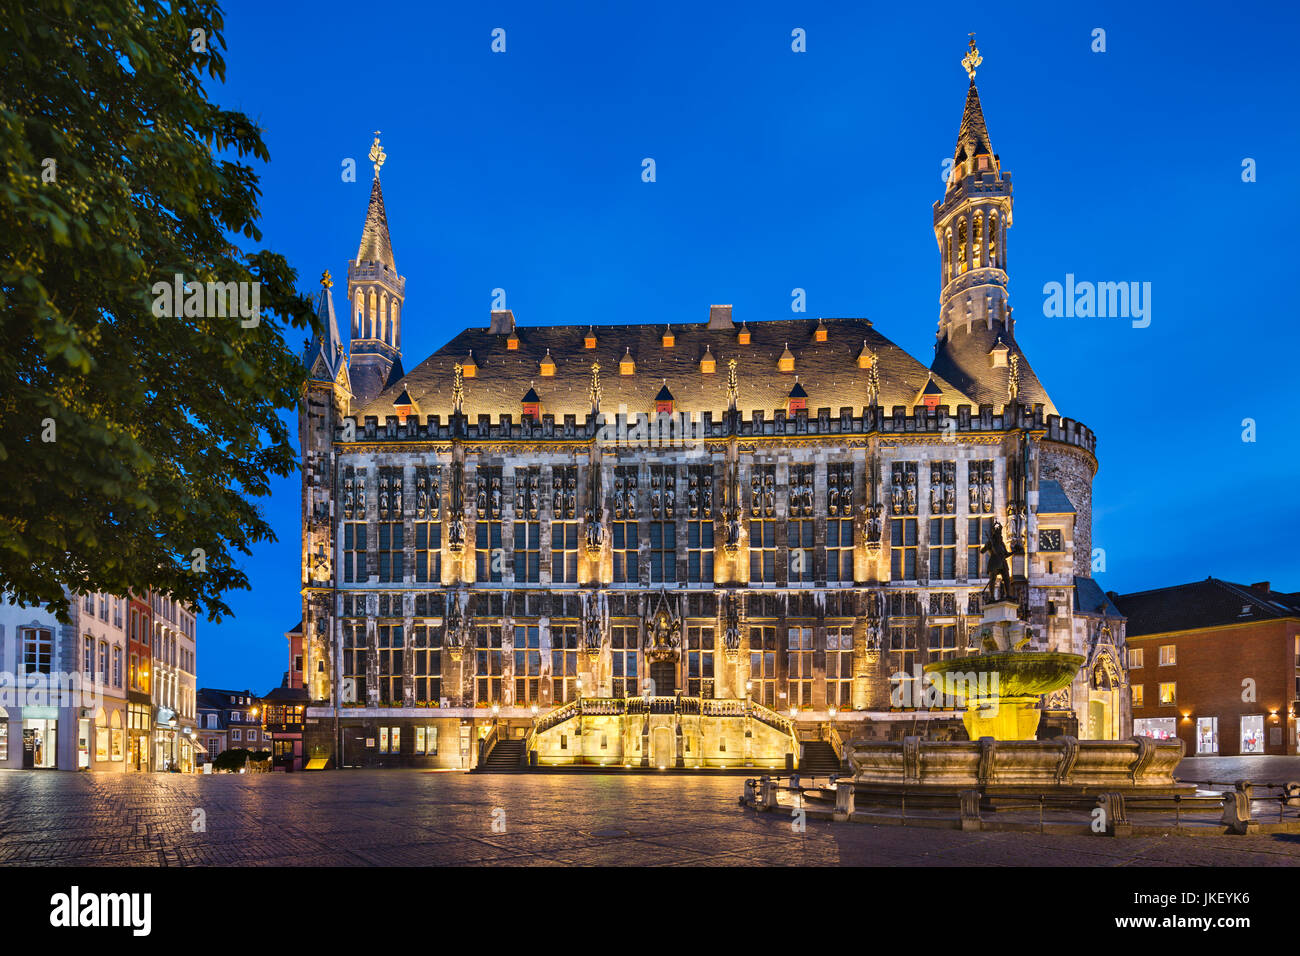 The famous old town hall of Aachen, Germany with night blue sky seen from the market square with the Karls fountain to the right. Taken with a shift l Stock Photo